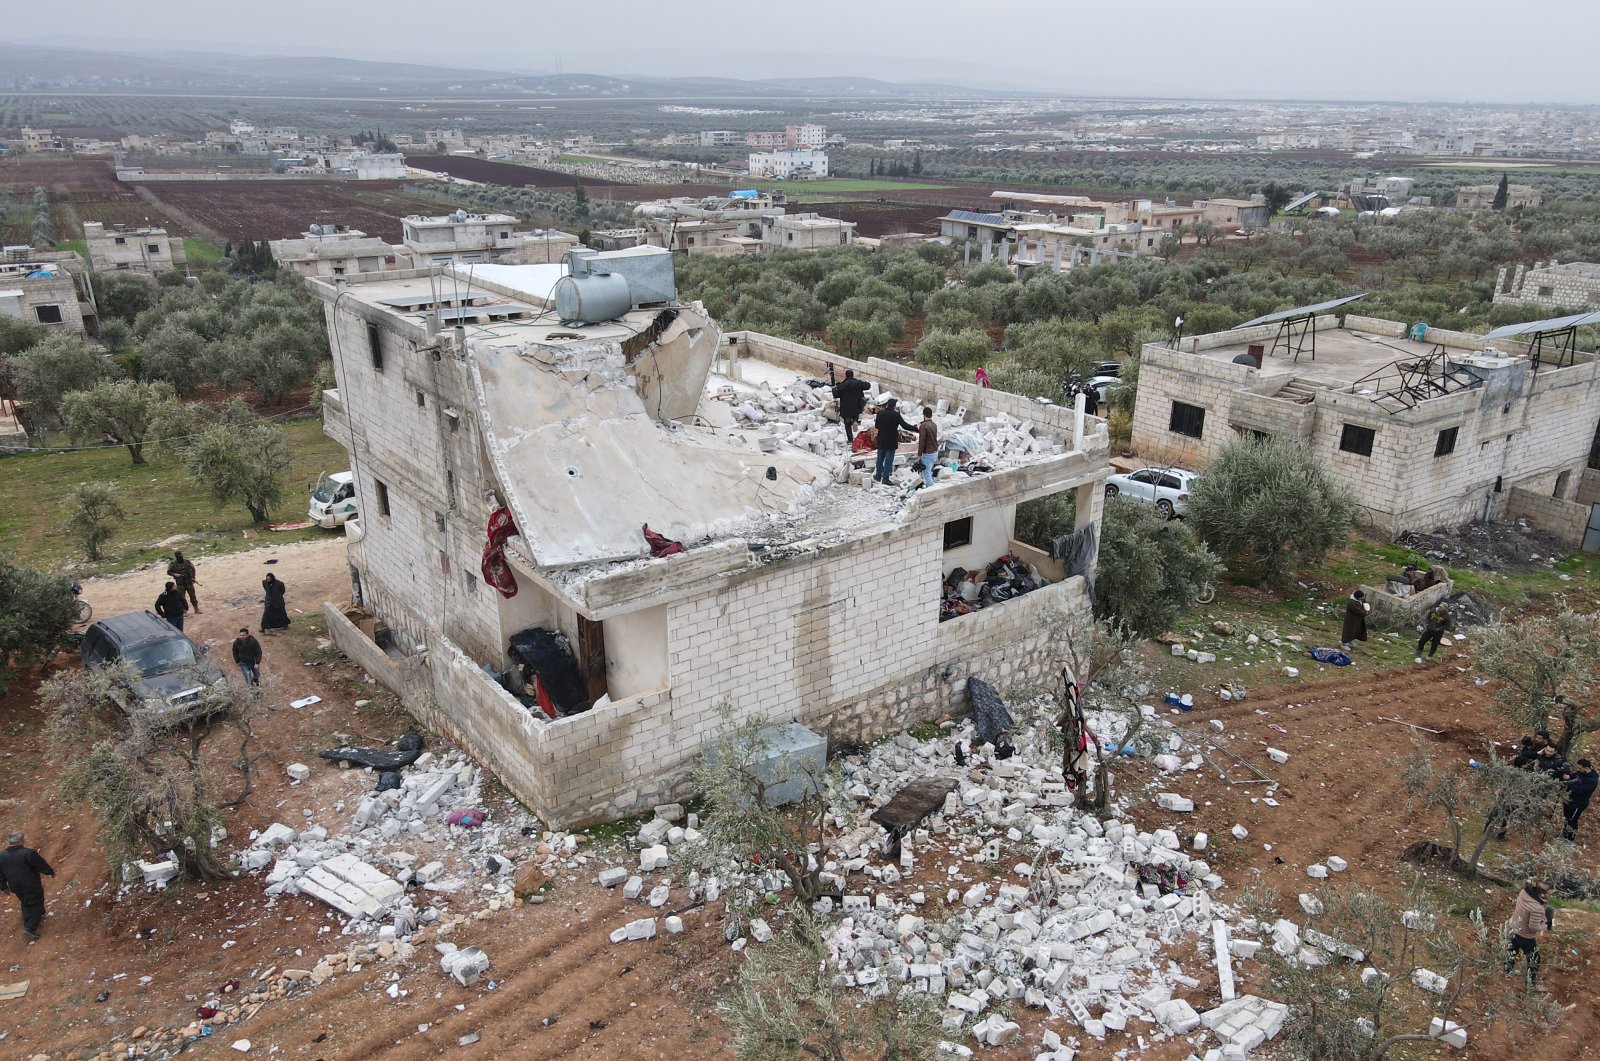 An aerial picture taken by a drone shows people inspecting a damaged building after an alleged counterterrorism operation by U.S. special forces in the early morning in Atmeh village in the northern countryside of Idlib, Syria, Feb. 3, 2022. (EPA Photo)